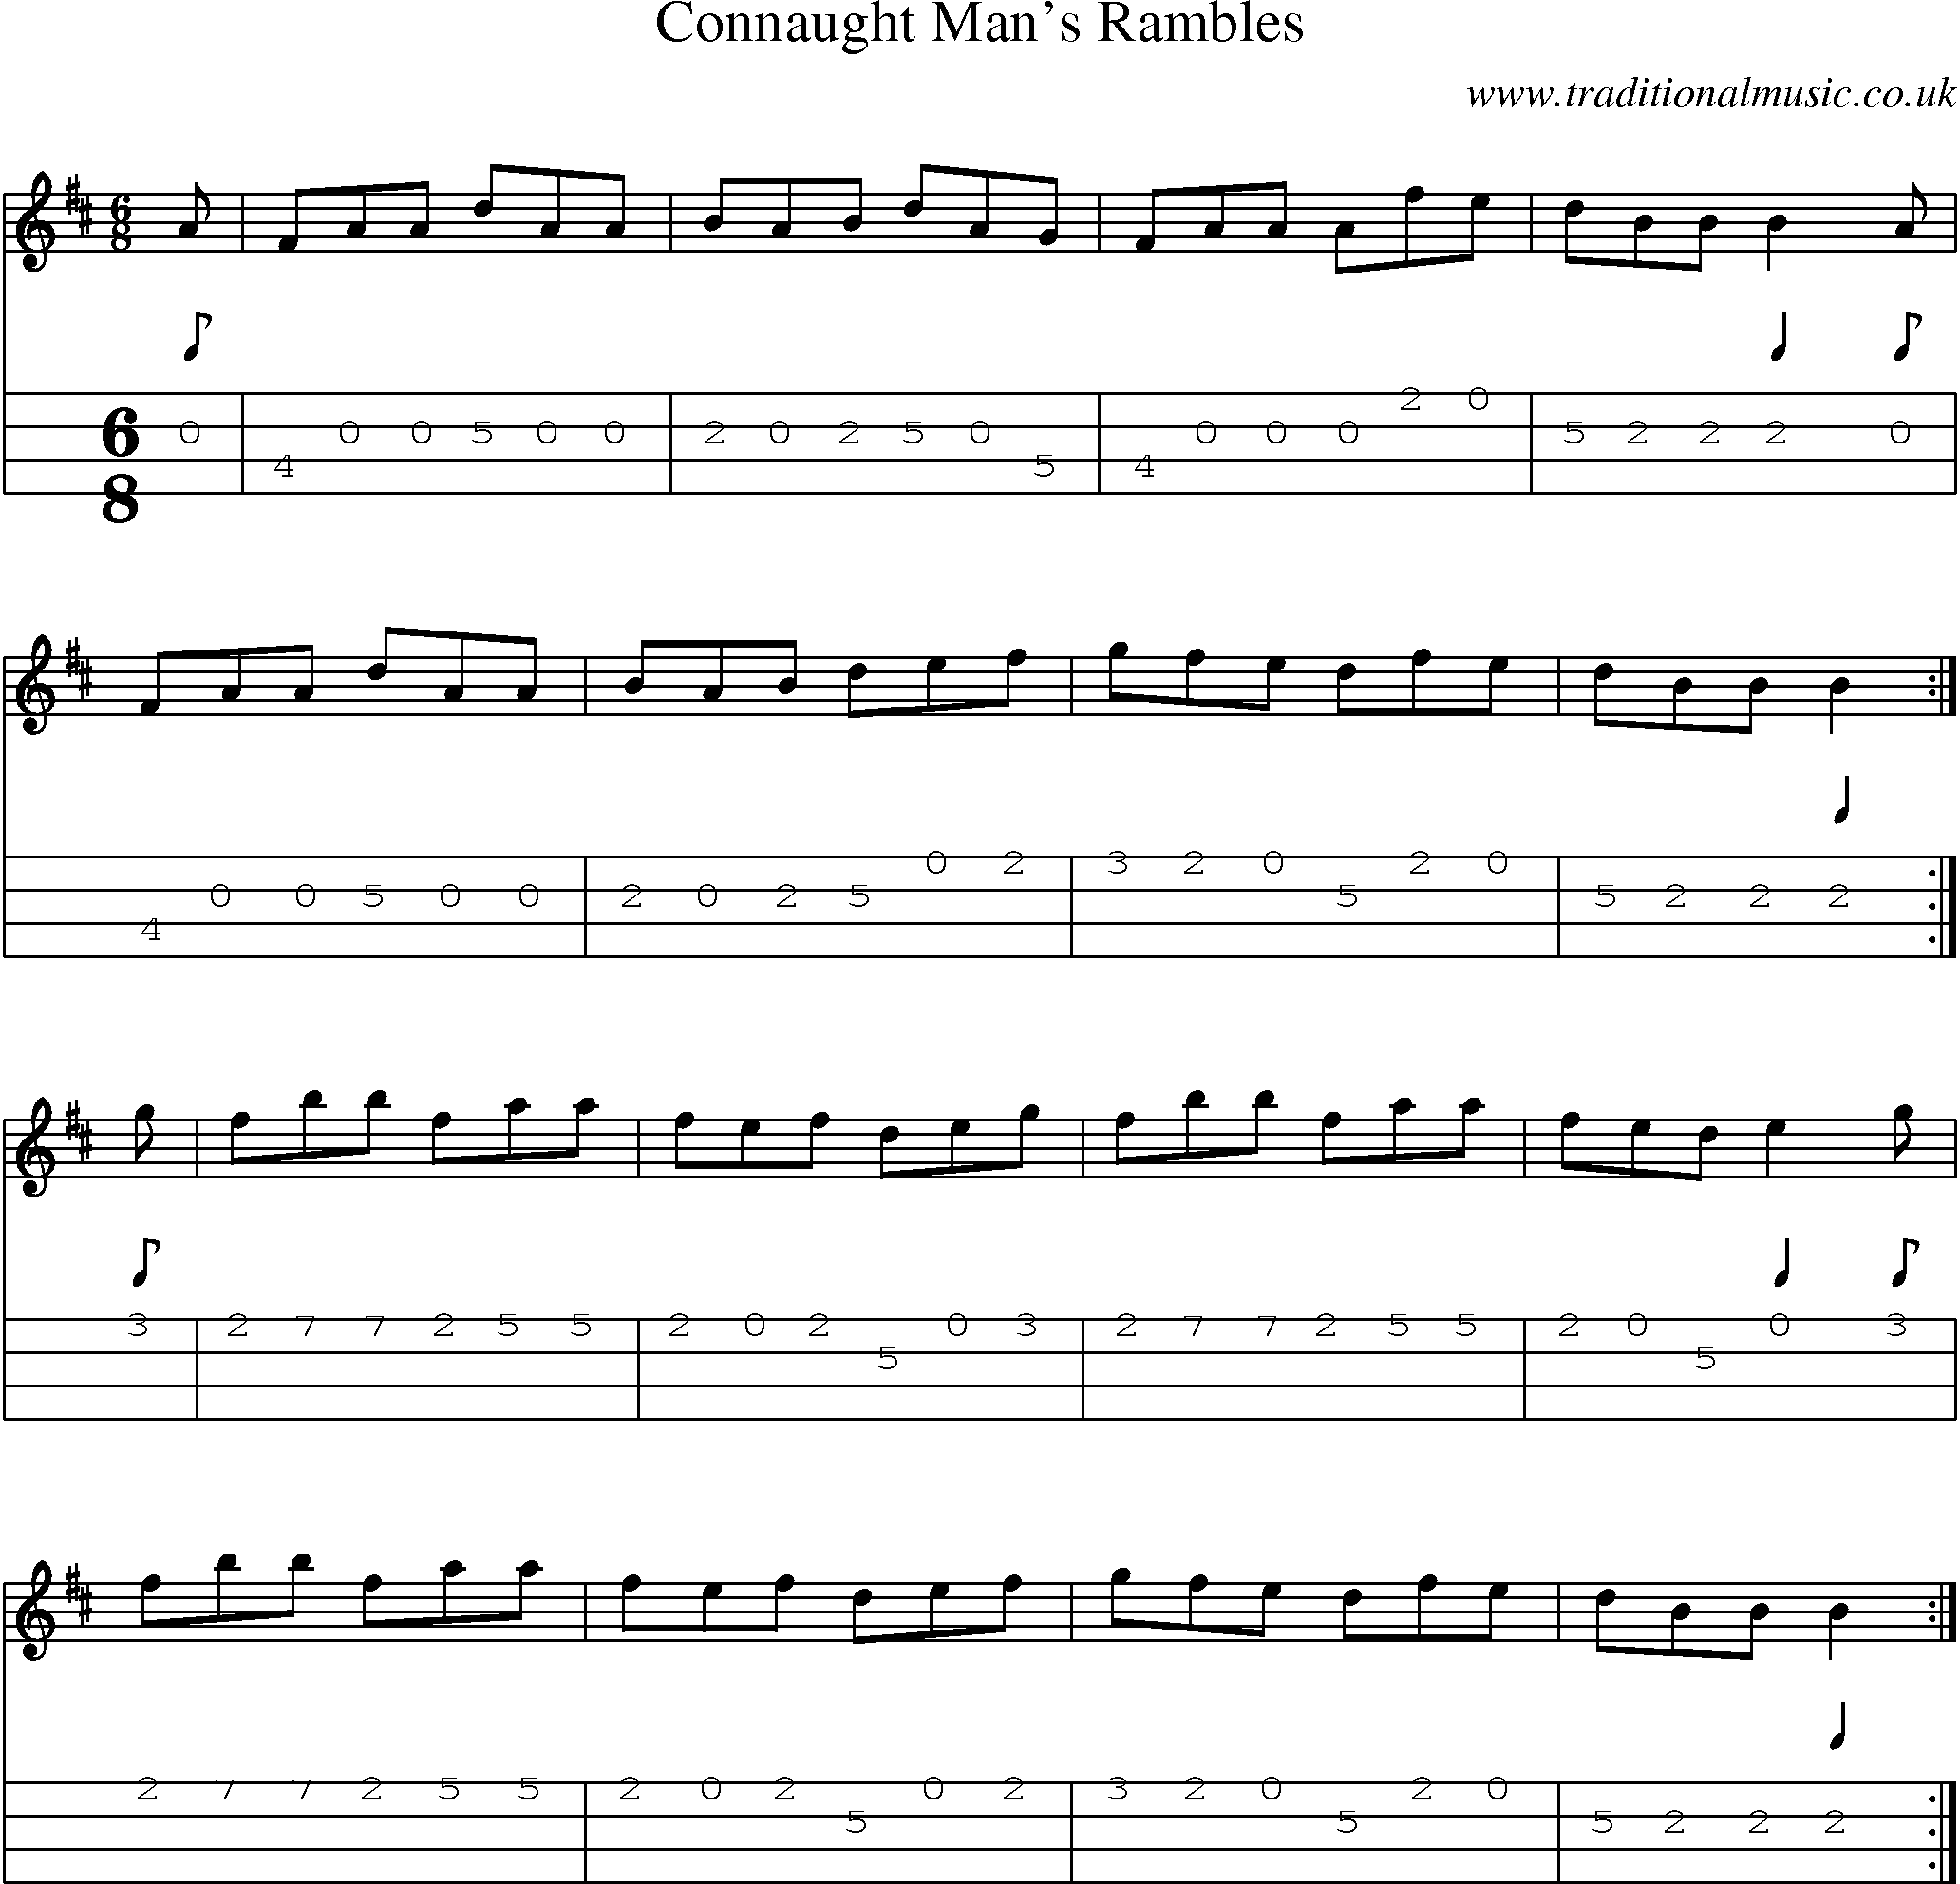 Music Score and Mandolin Tabs for Connaught Mans Rambles